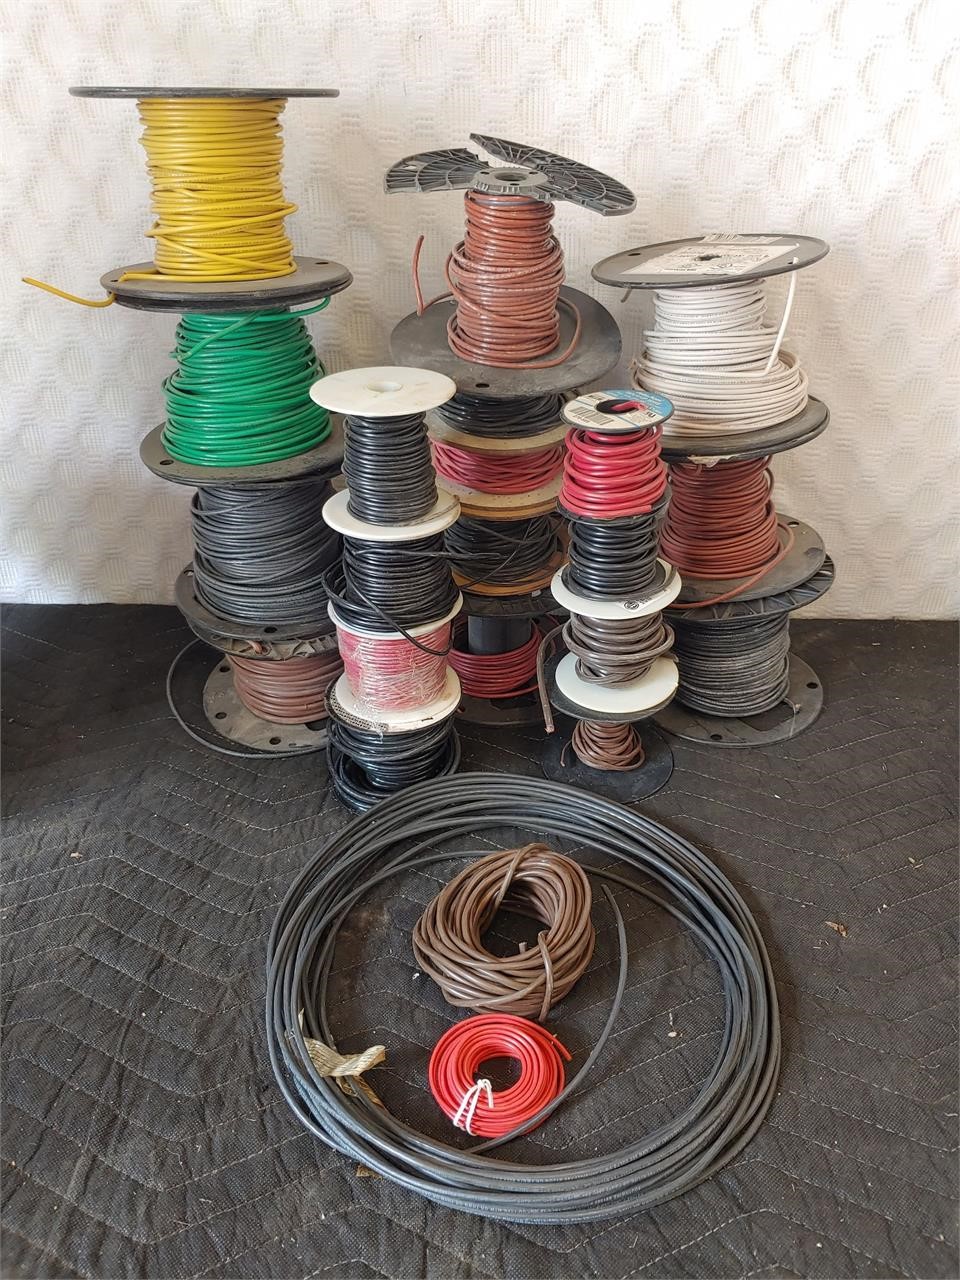 Electrical - Assortment of Wire